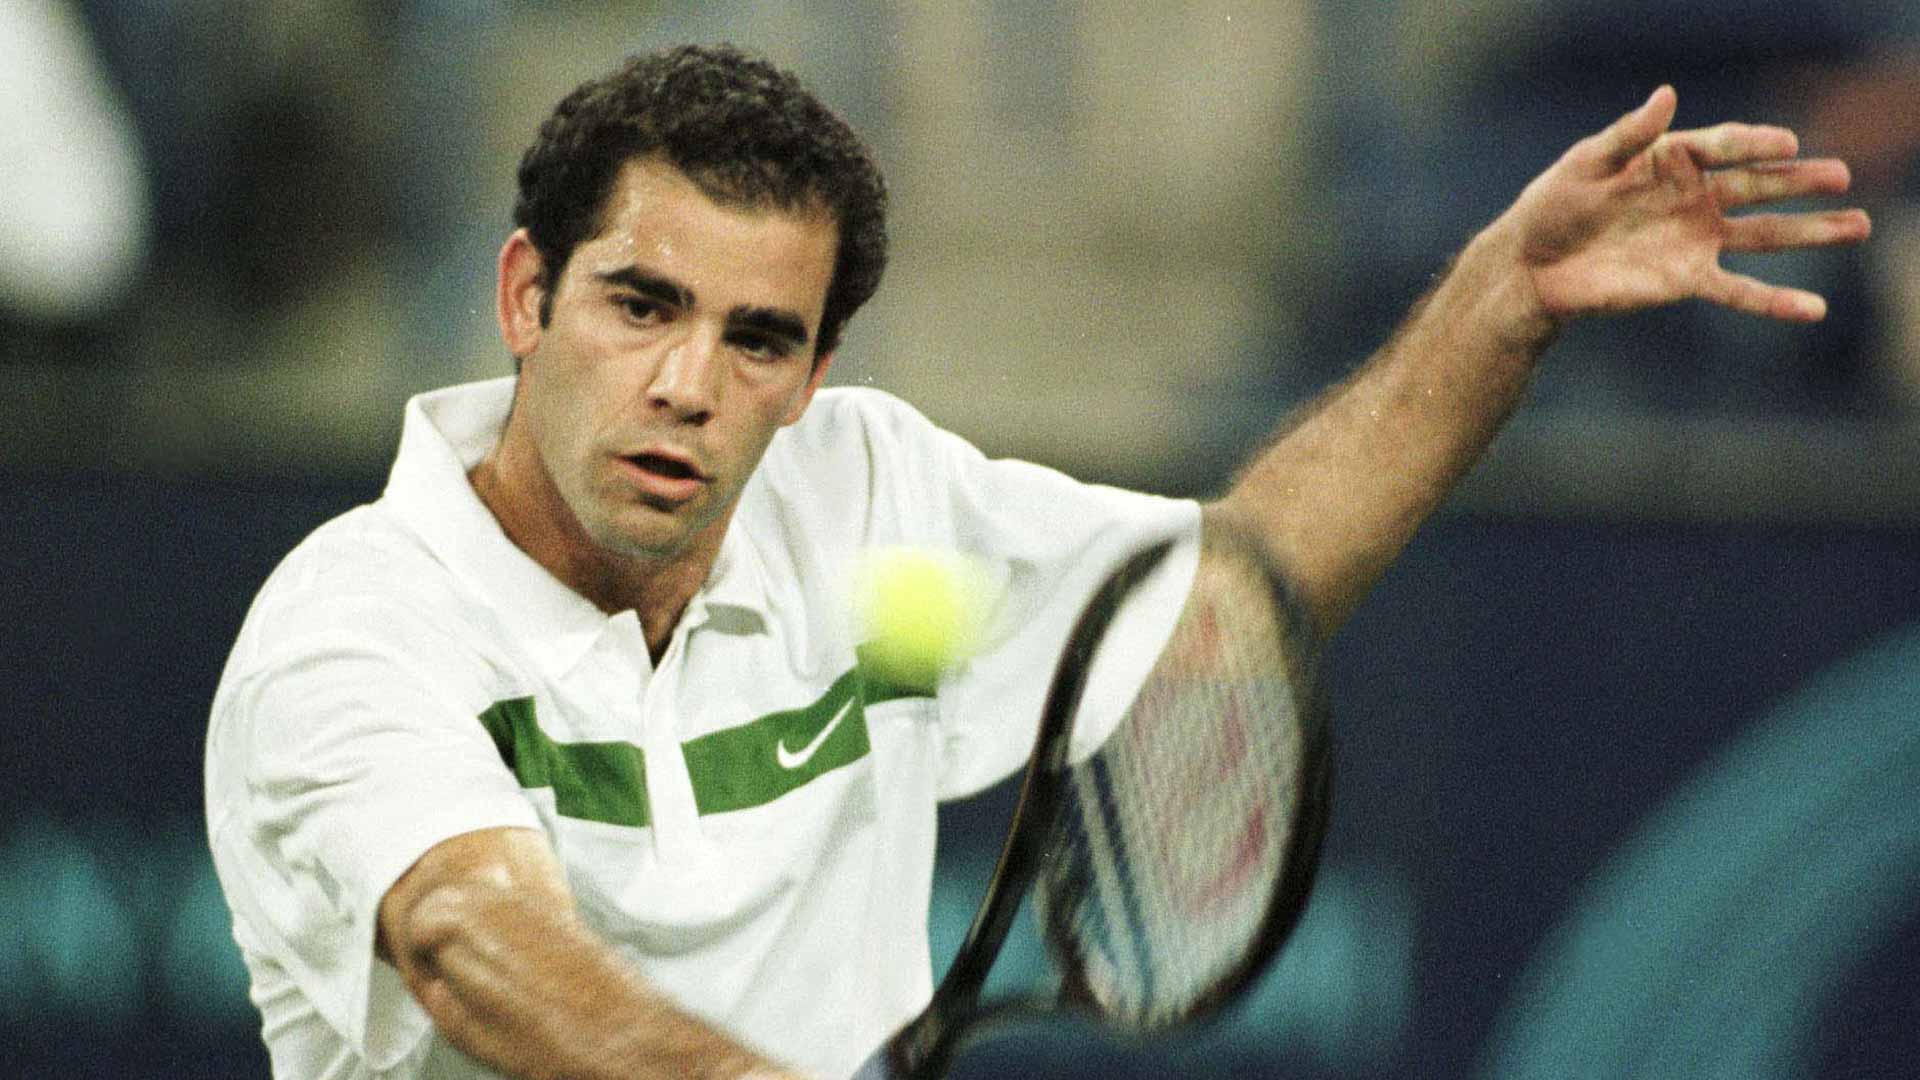 Notable No. 1s In 50 Years Of Pepperstone ATP Rankings (Part 1